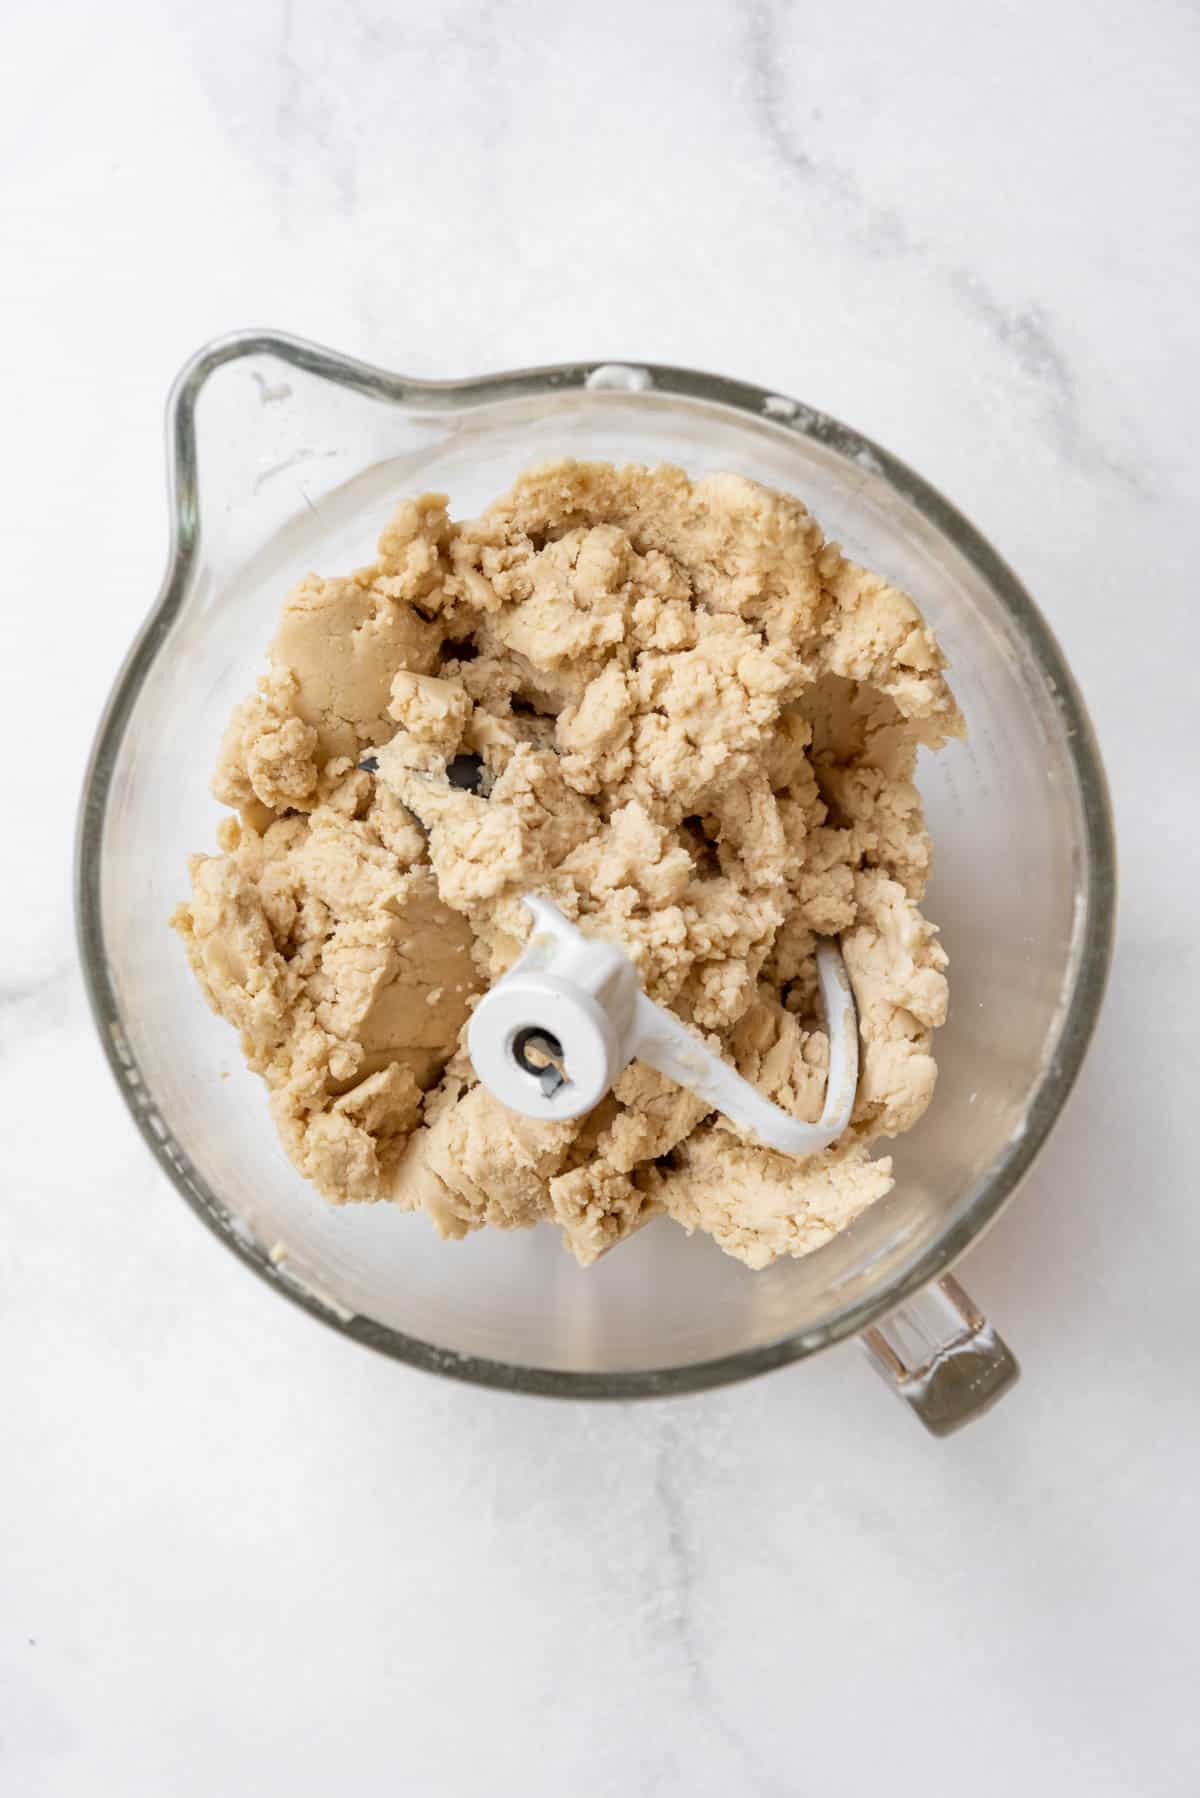 Sugar cookie dough in a glass mixing bowl.